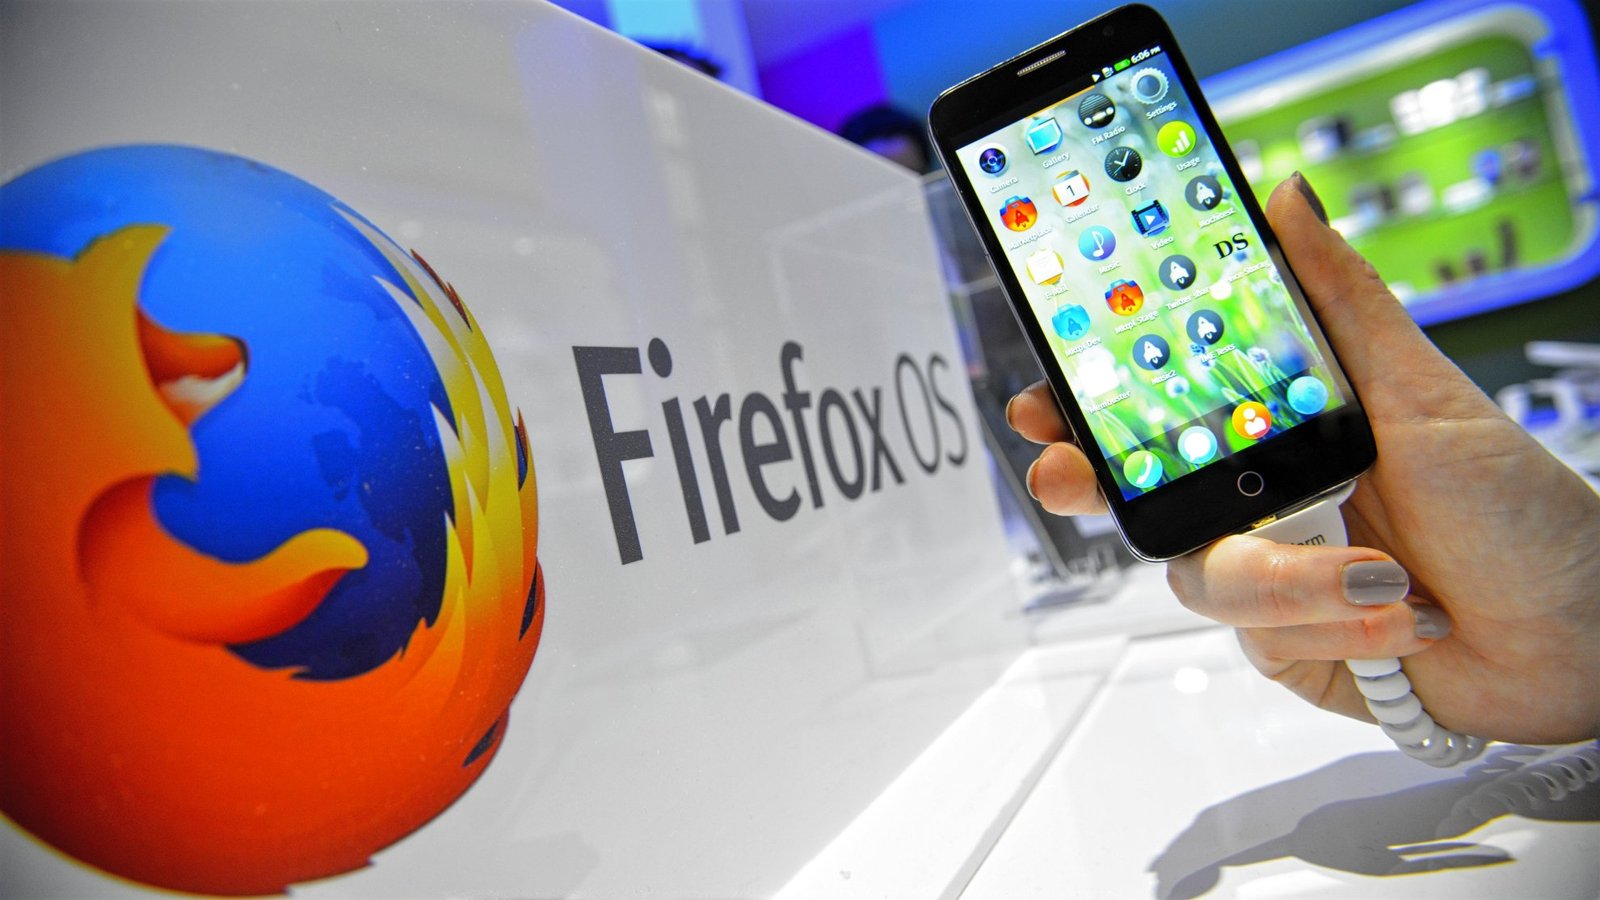 Why Mozilla failed to standout in Mobile market